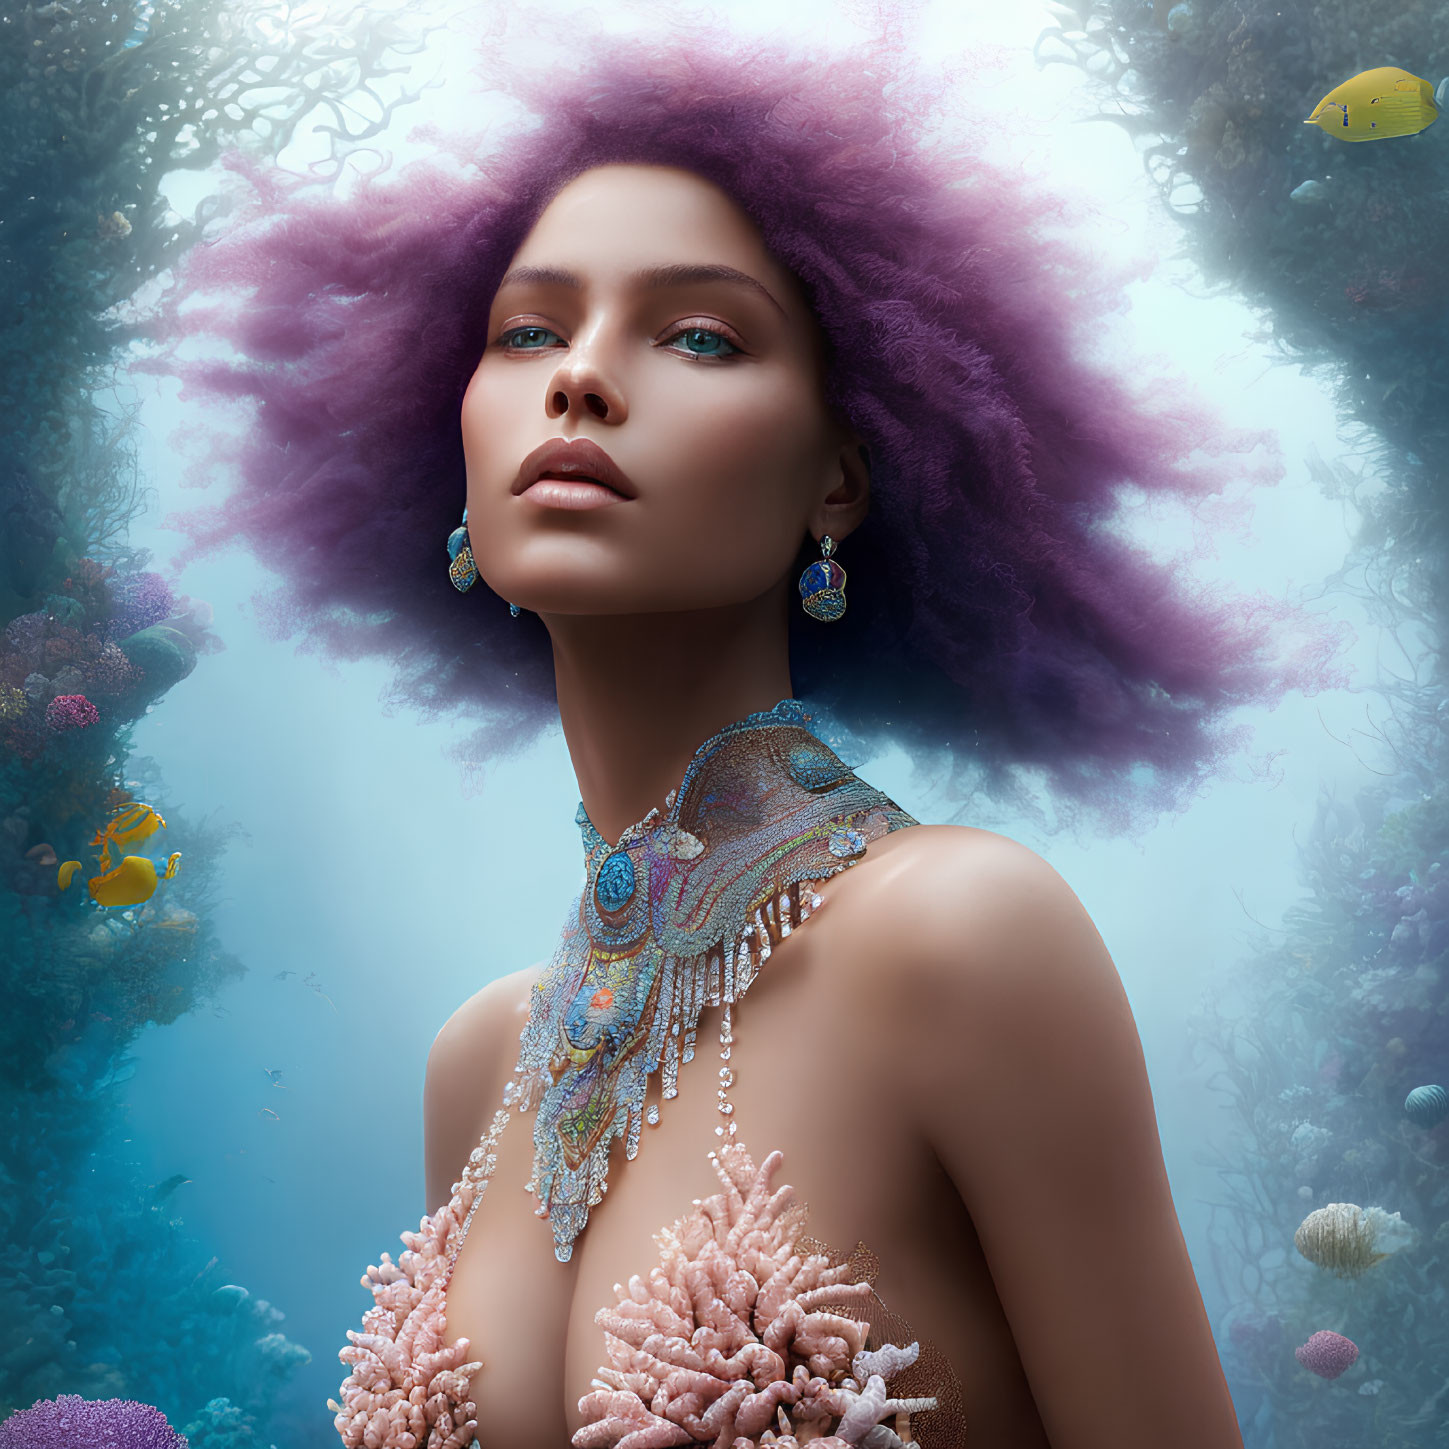 Violet-haired woman in underwater scene with fish and coral necklace